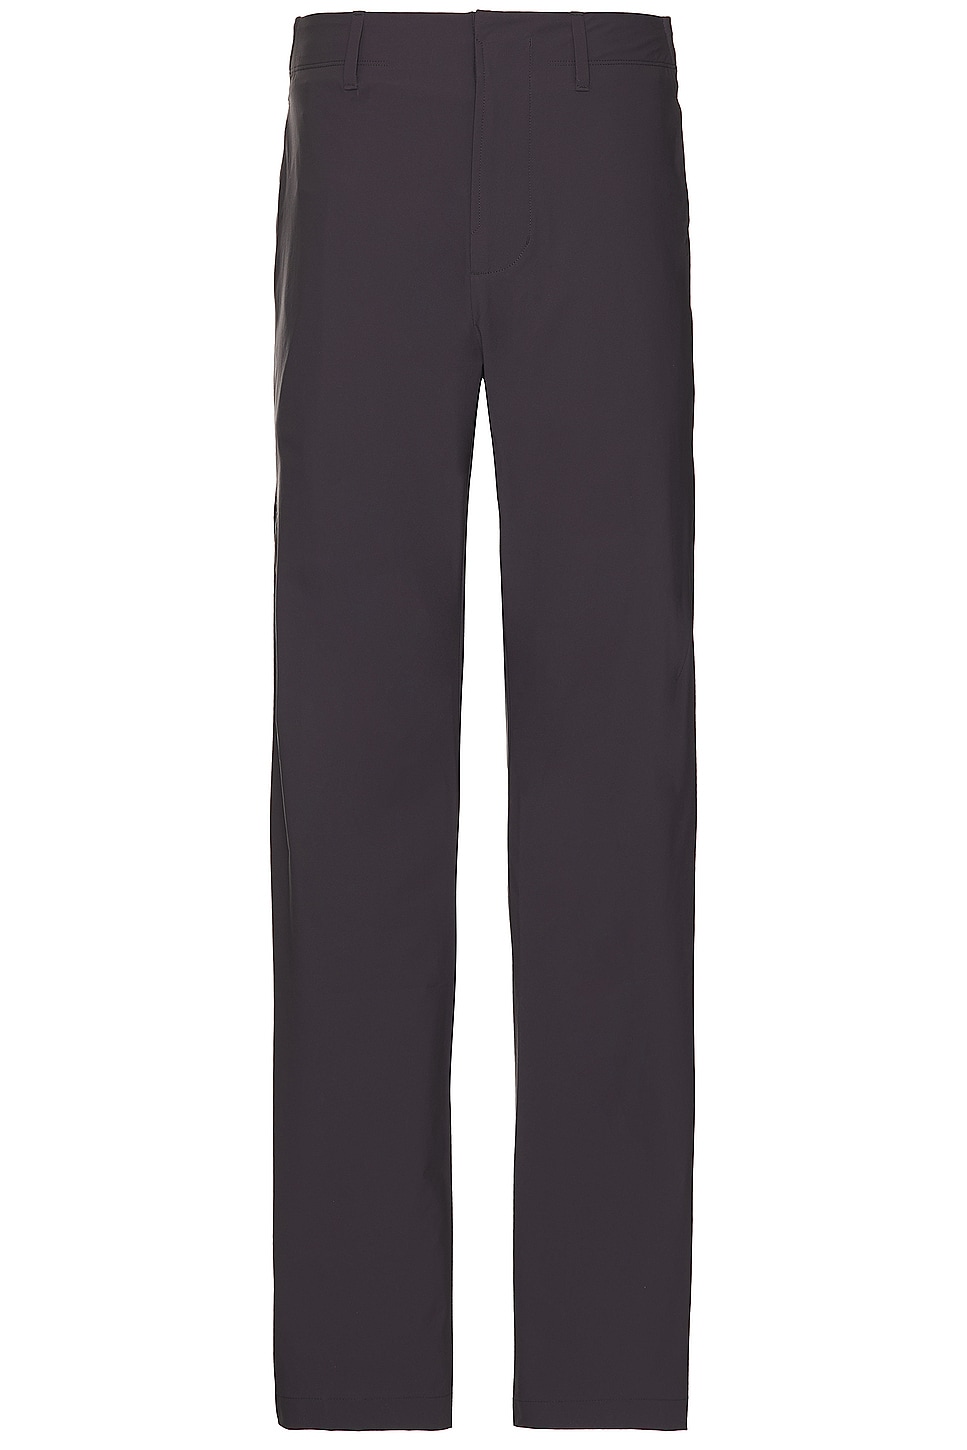 Image 1 of POST ARCHIVE FACTION (PAF) 6.0 Technical Pants in Brown